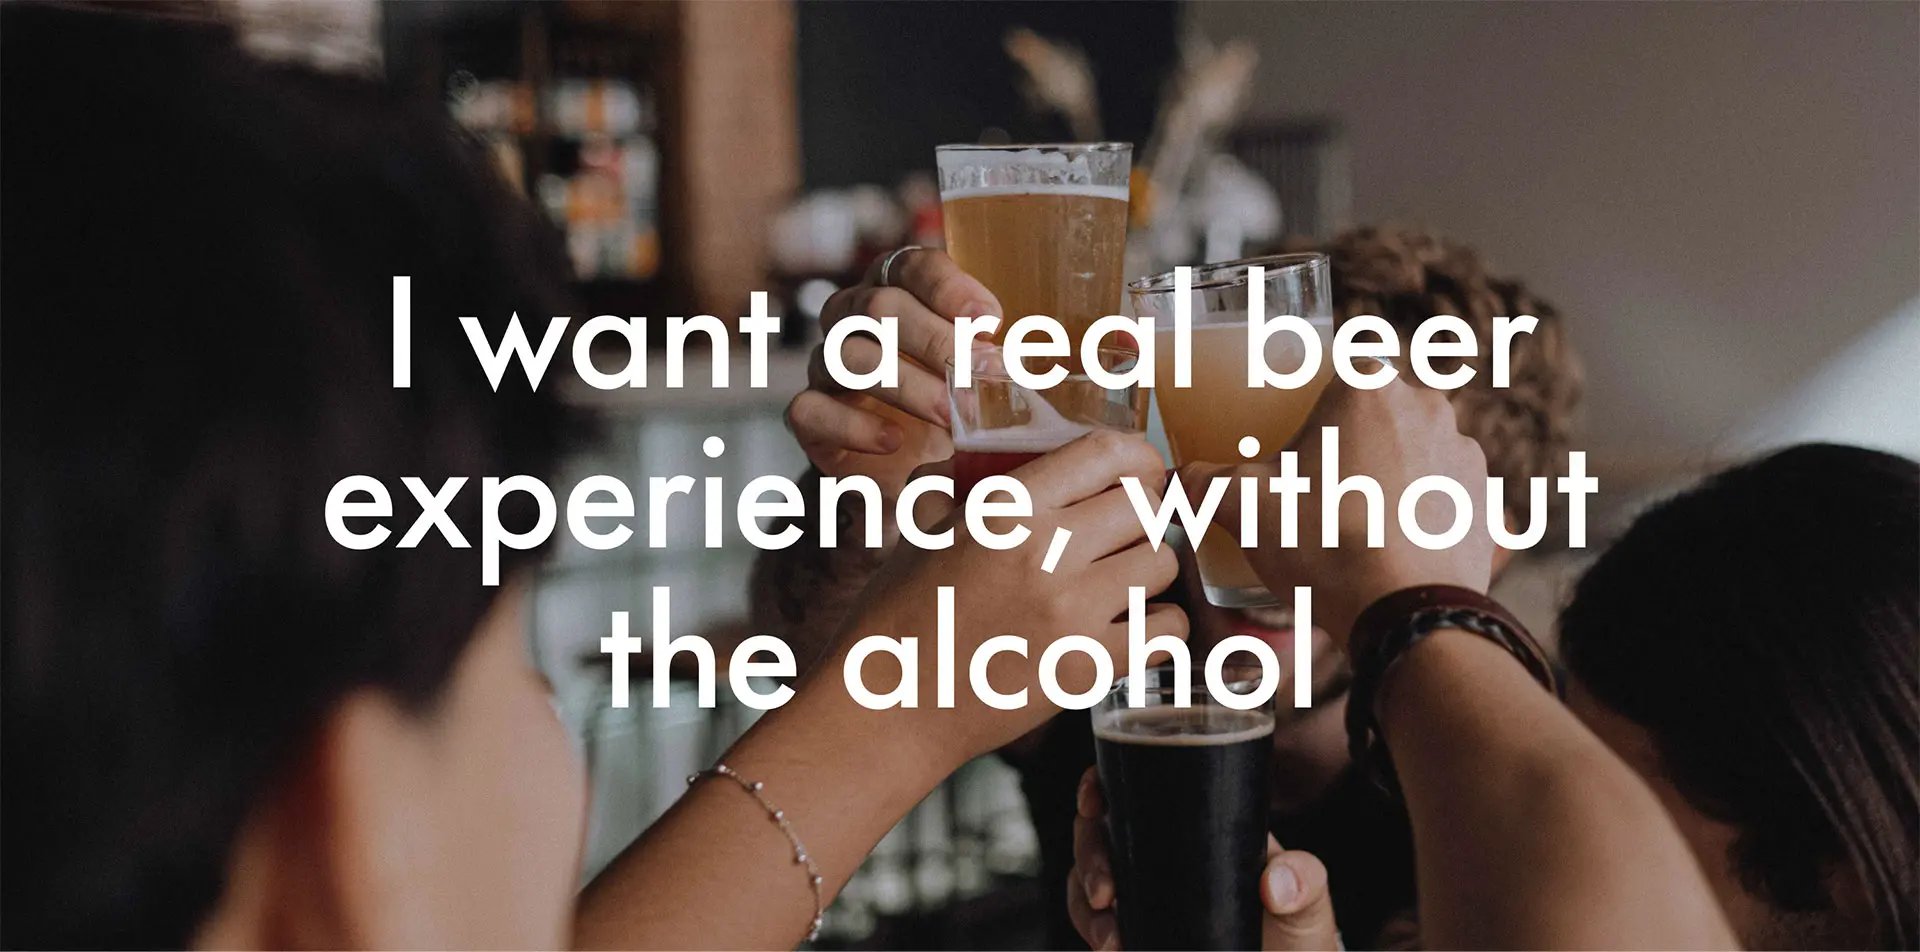 I want a real beer experience, without the alcohol